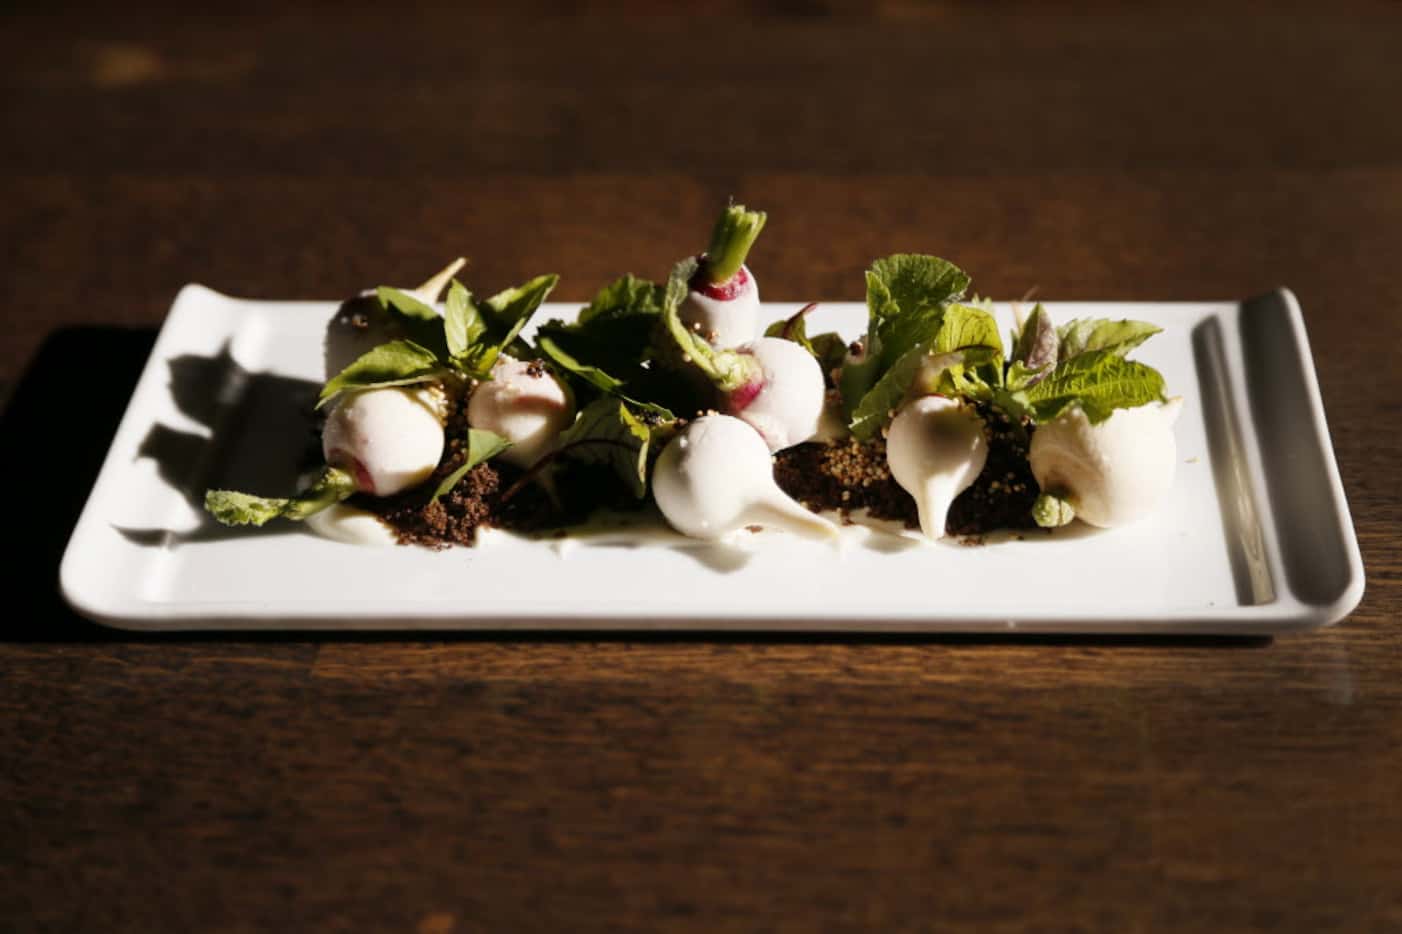 Chef Kyle McClelland's radishes cloaked in butter and radish greens on rye-crumb "soil"...